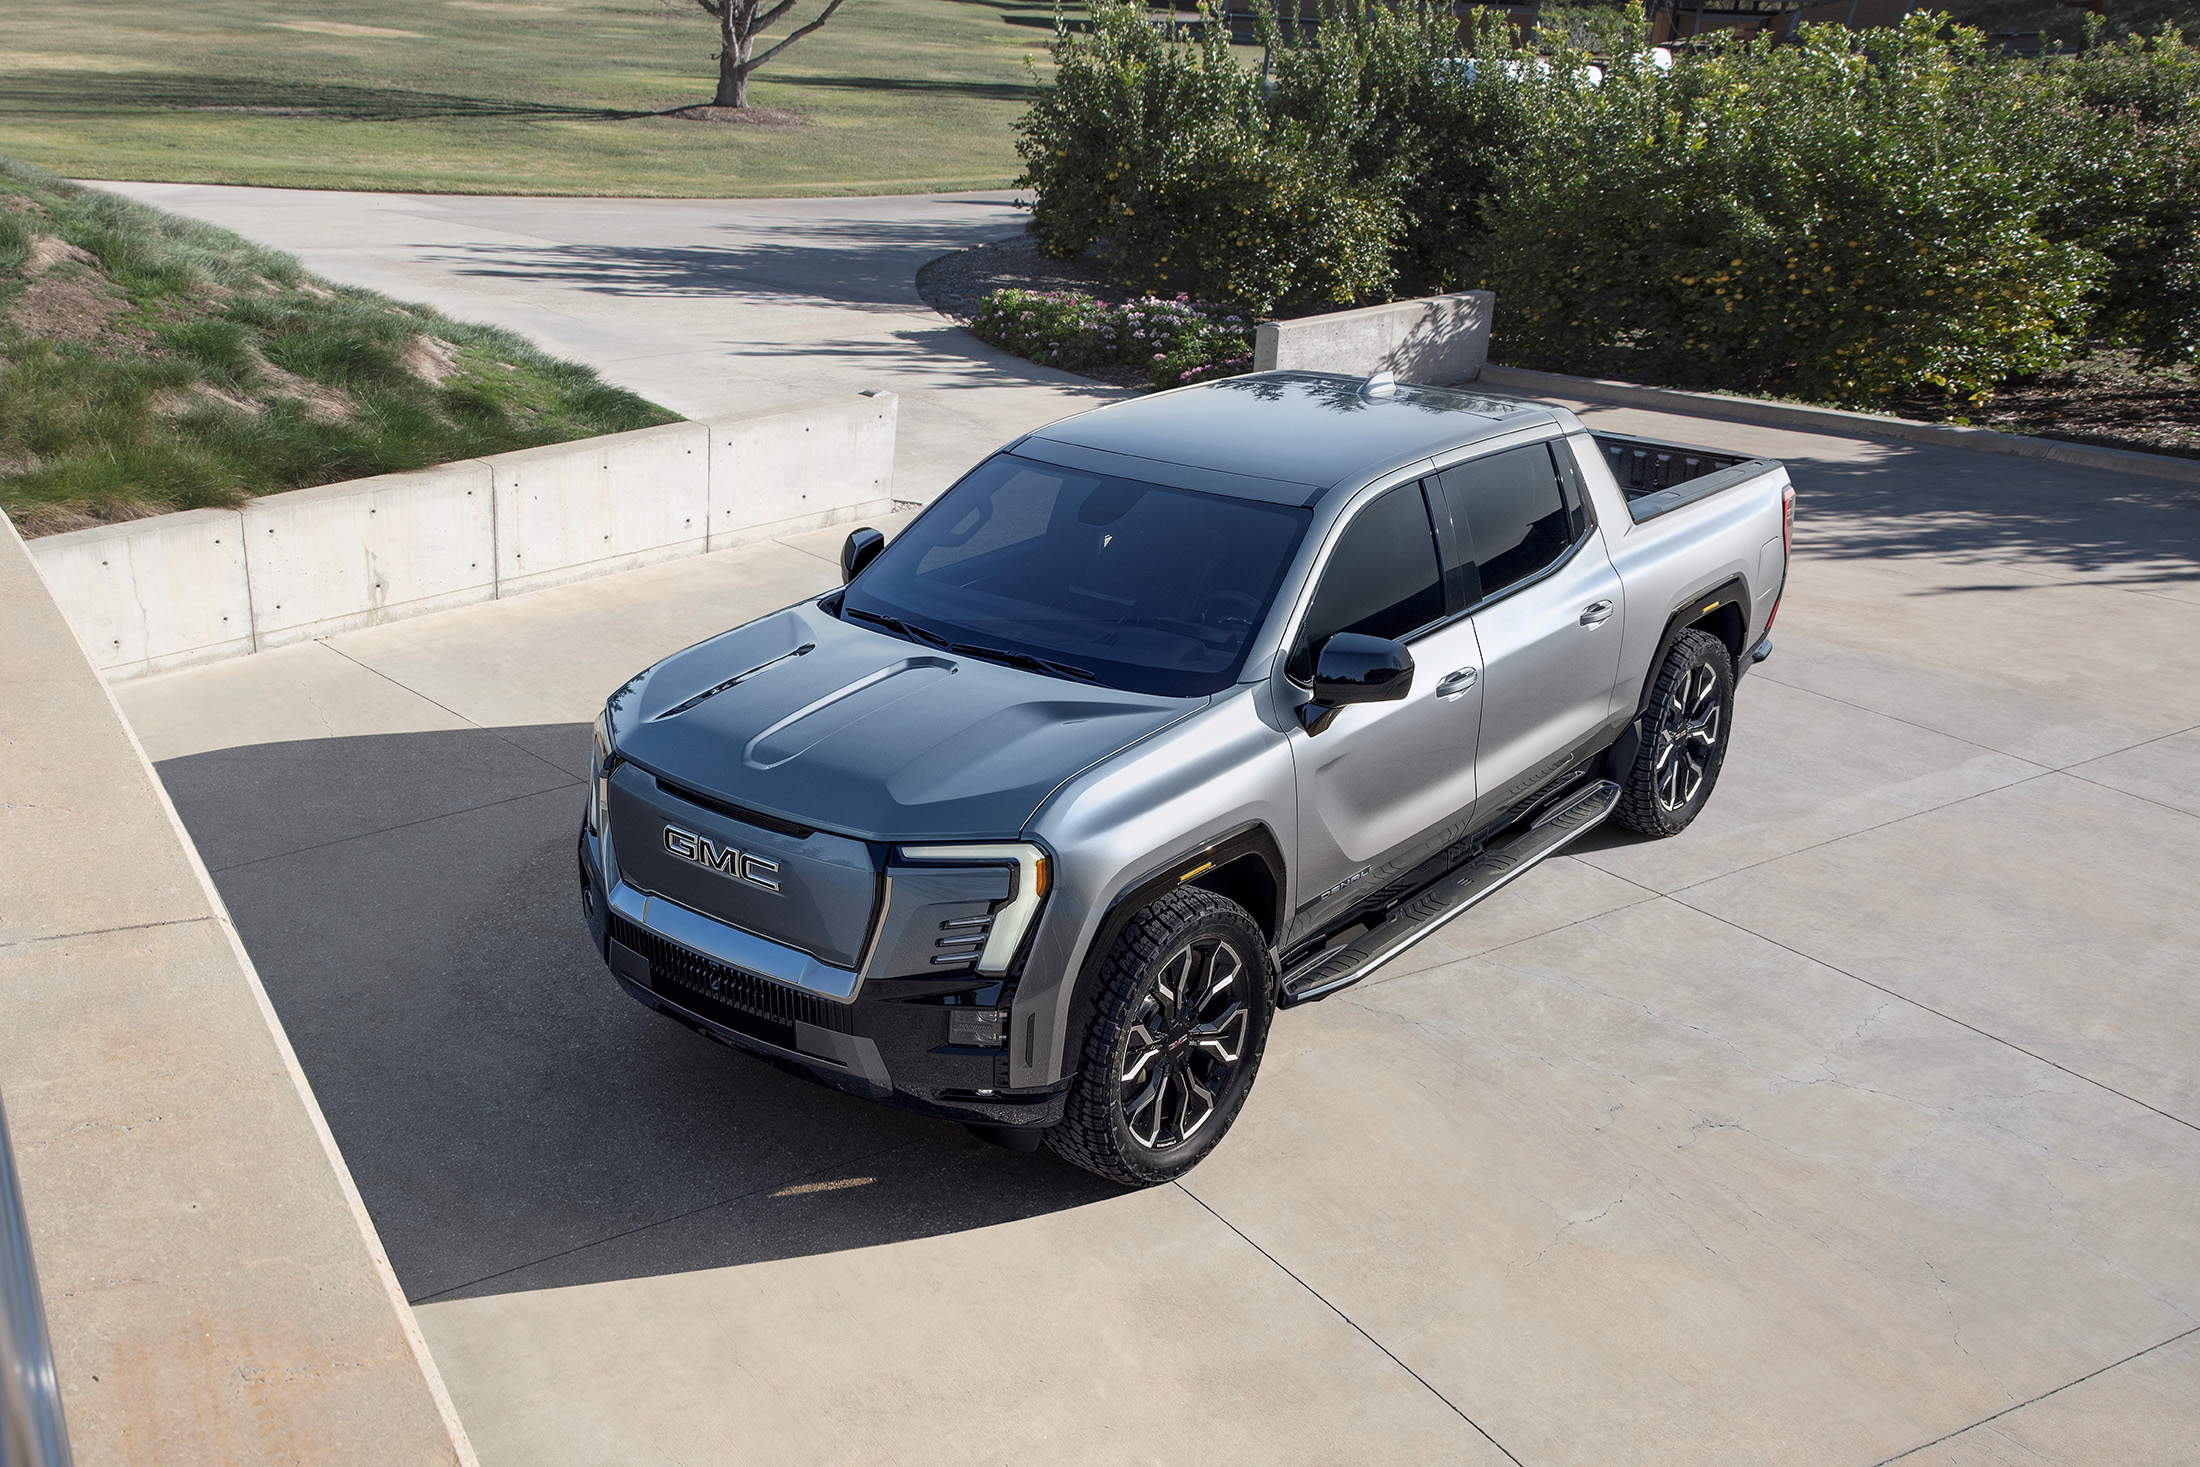 GMC's Denali Electric Truck Goes on Sale in Early 2024 With a